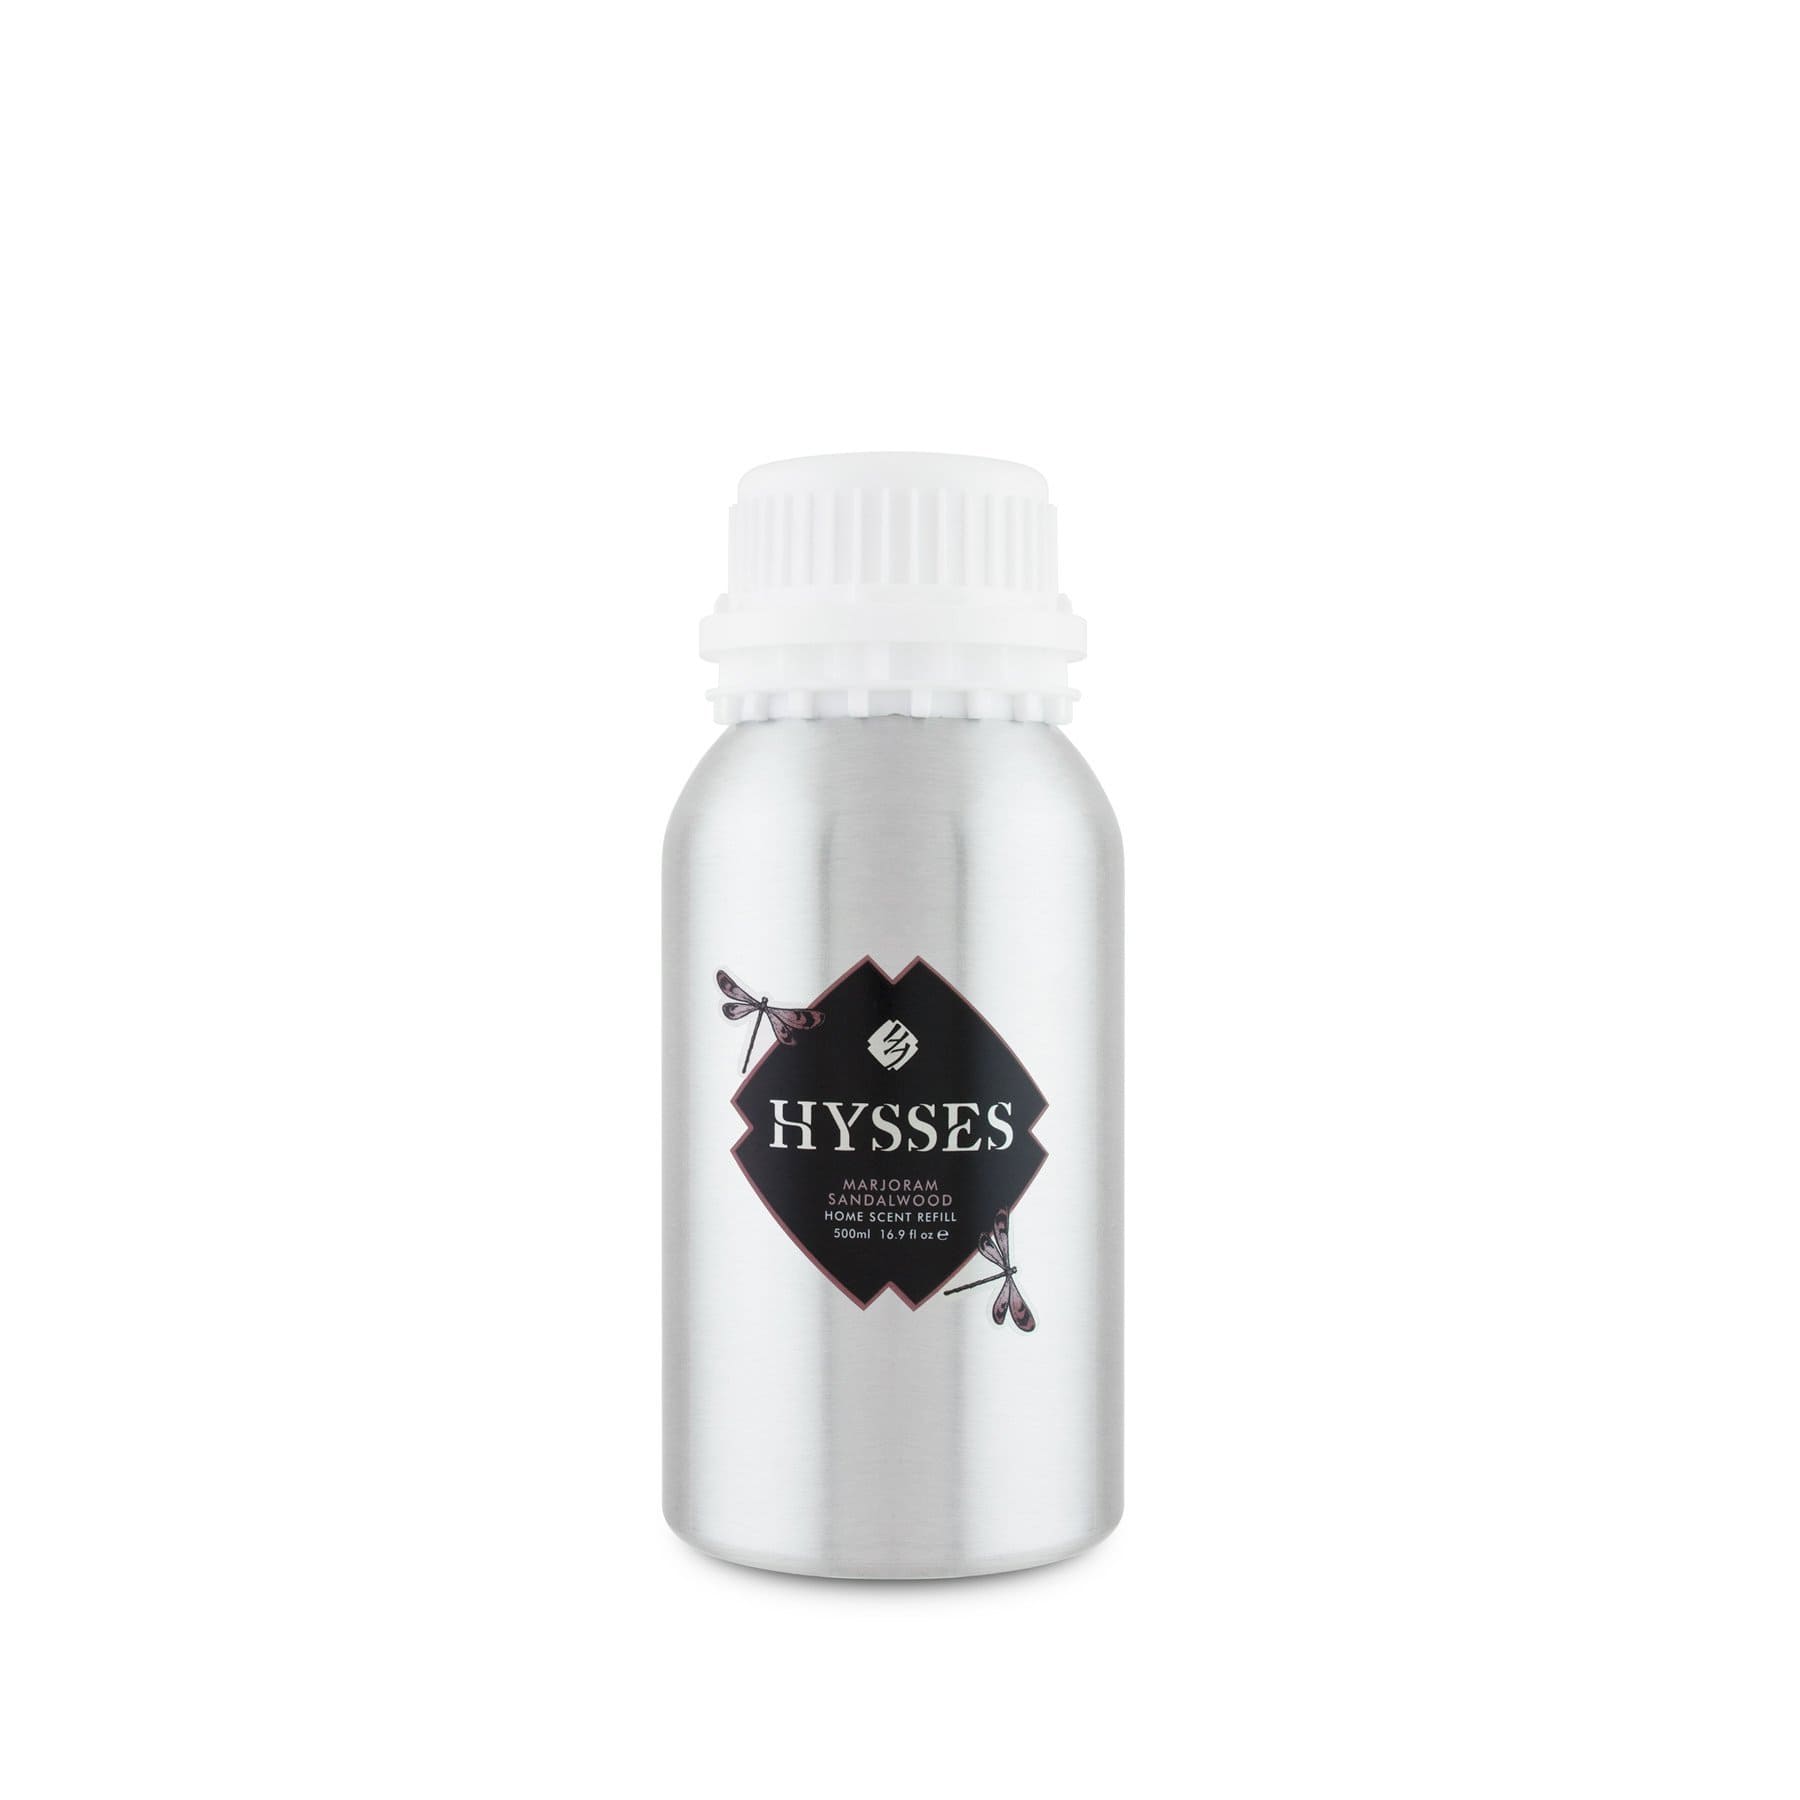 Hysses Home Scents 500ml Refill Home Scent Marjoram Sandalwood, 500ml